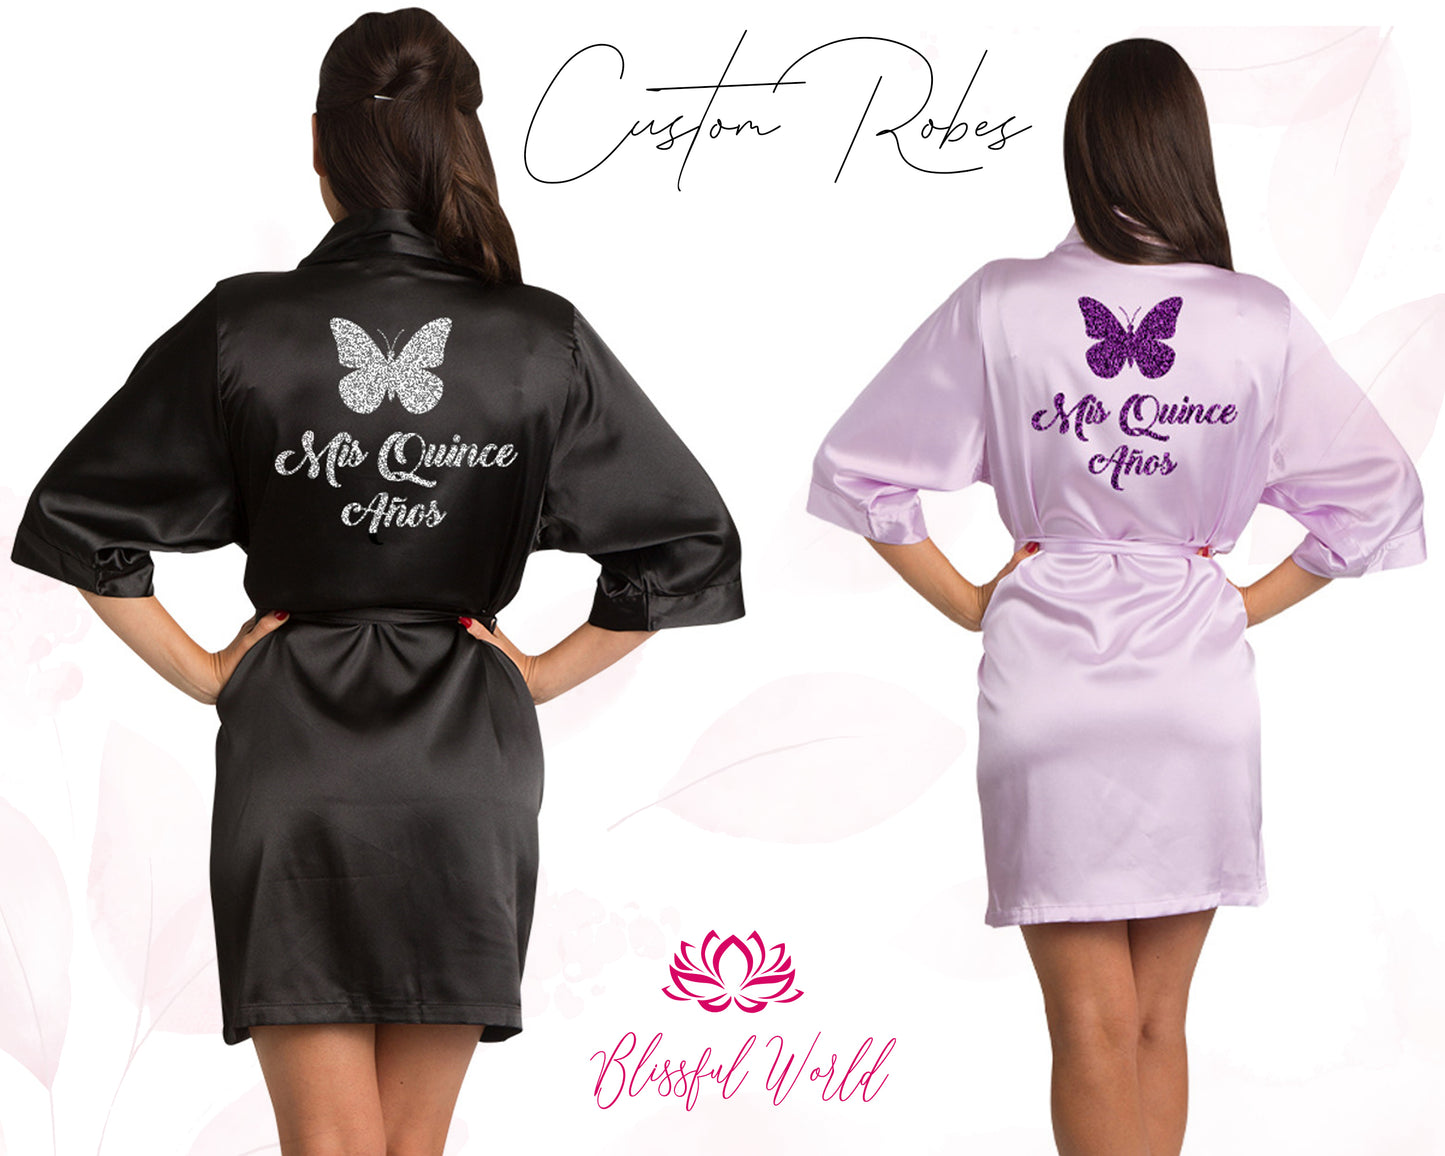 Mis Quince anos satin robes getting ready satin robes Personalized Robes Custom Robes Kimono Robes Mis Quince Robe Birthday Robes Satin Robe